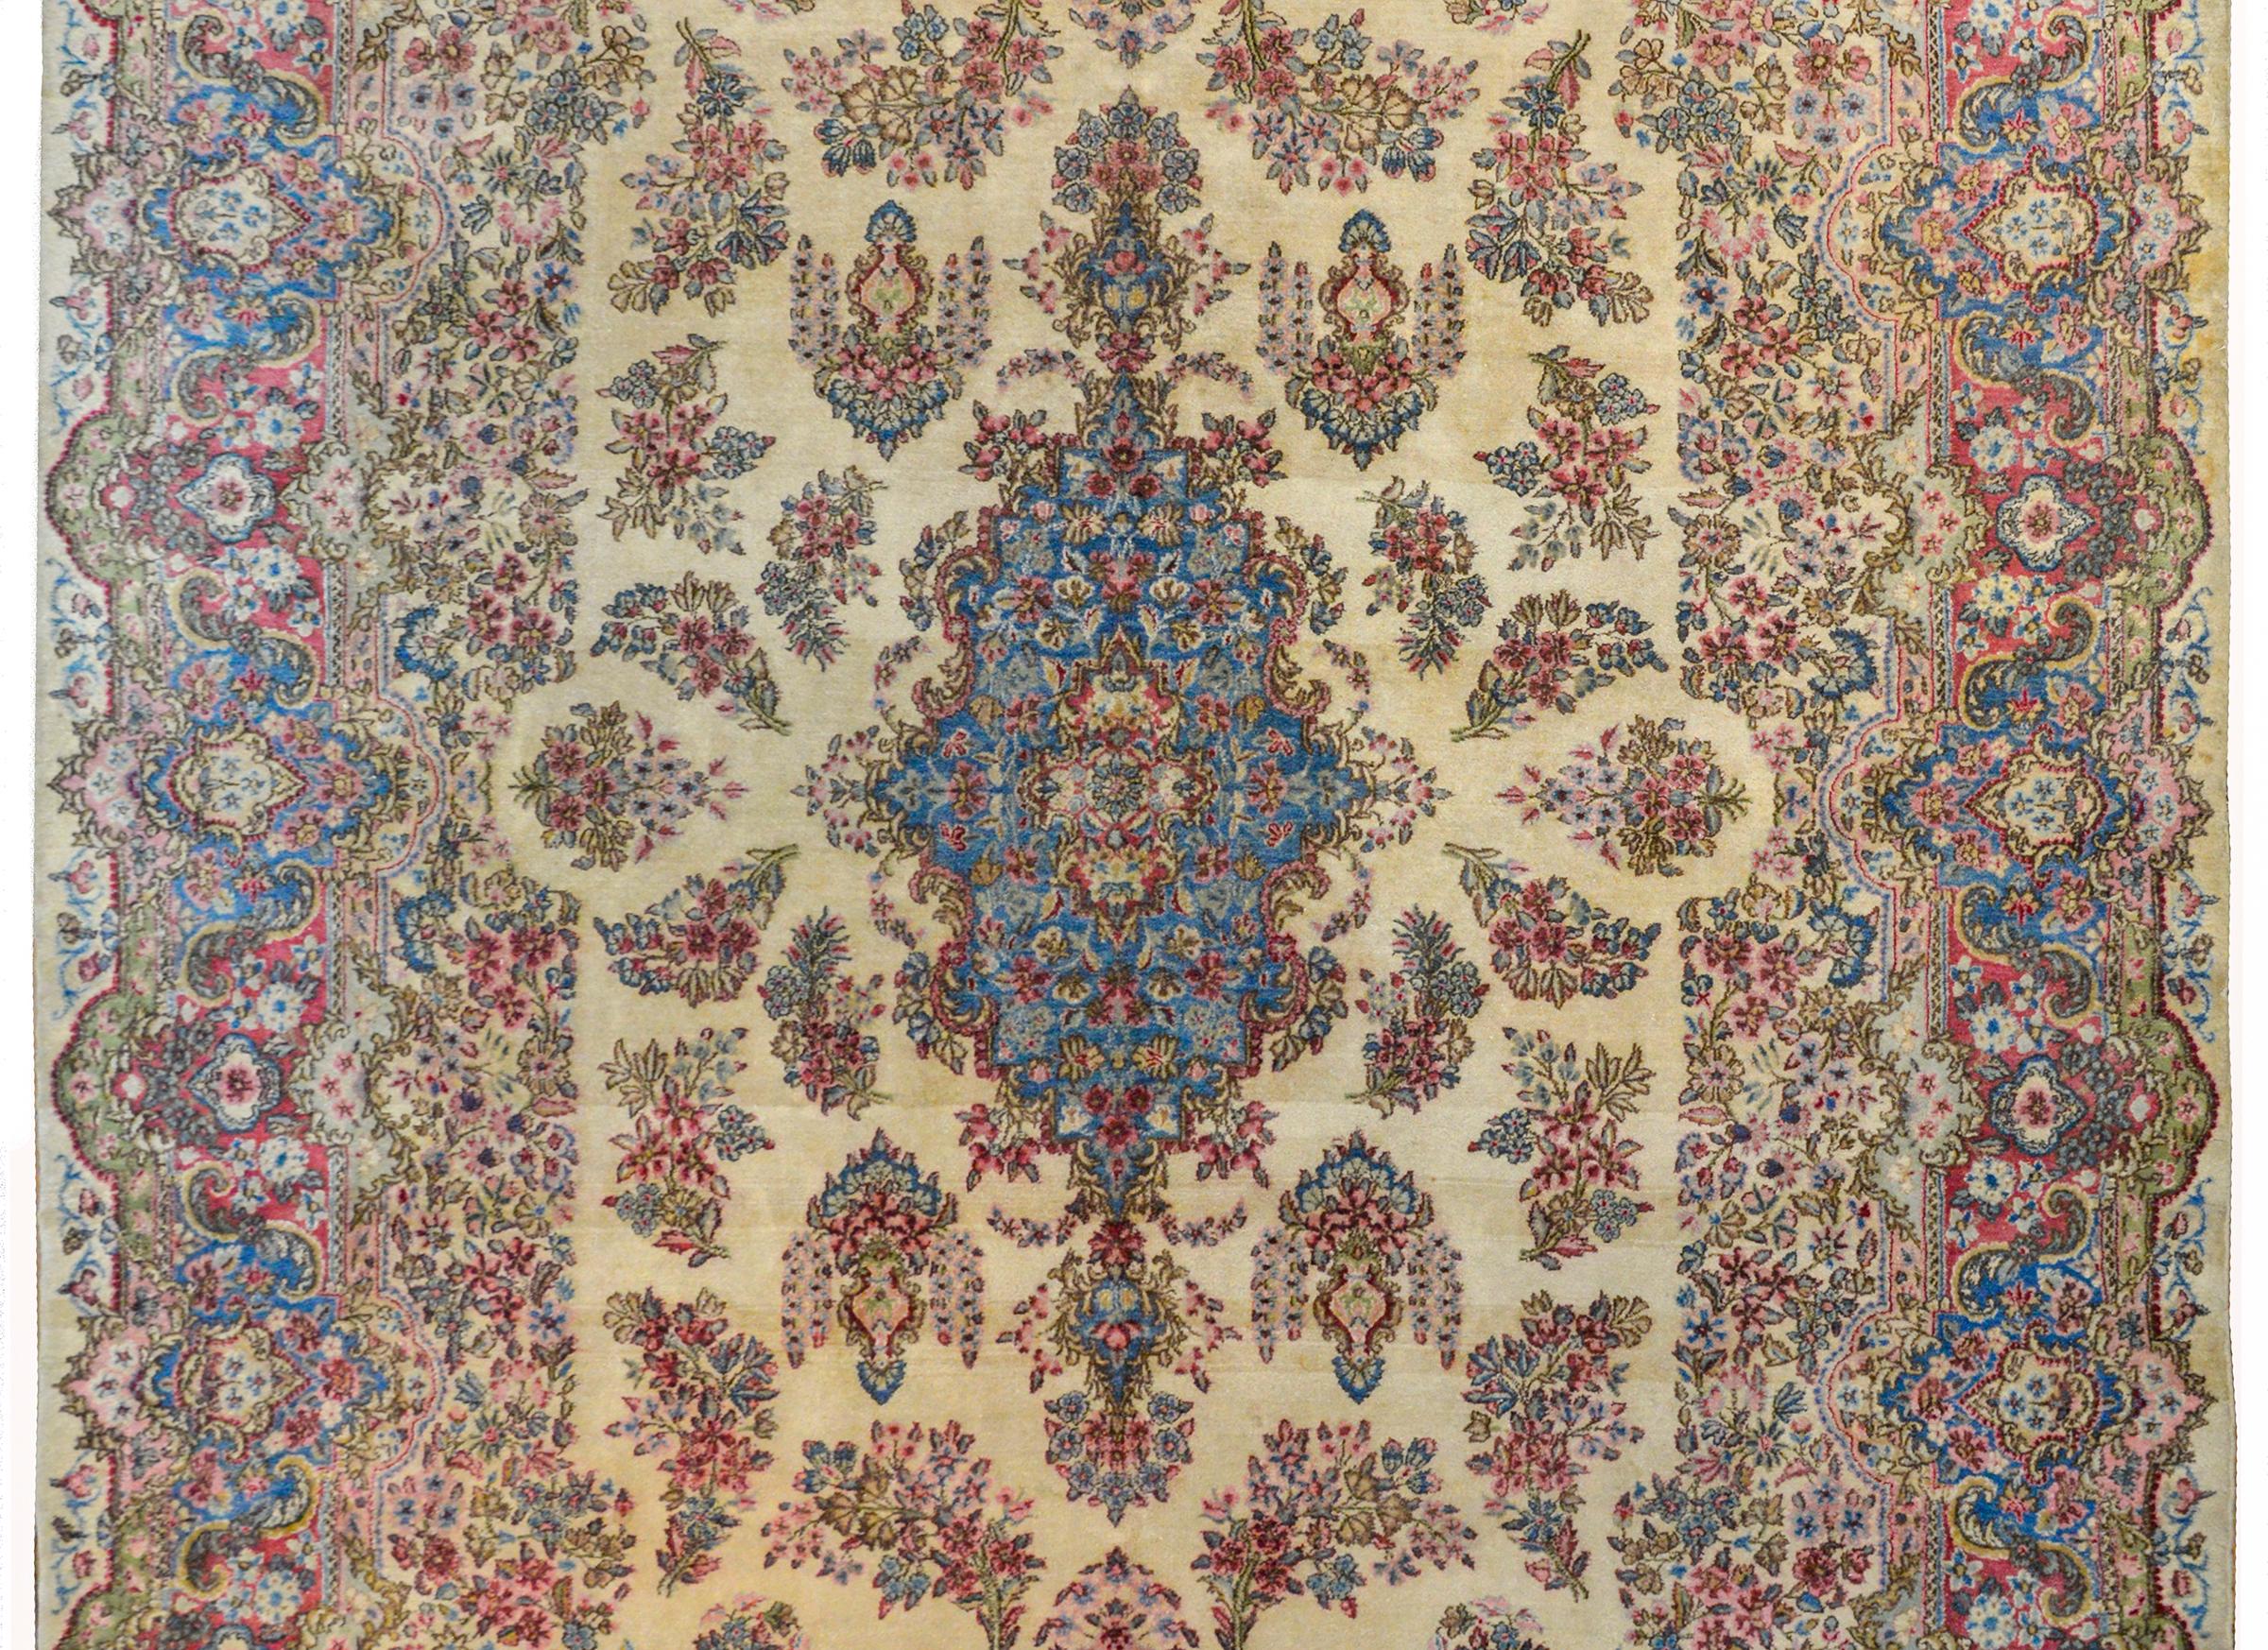 A beautiful early 20th century Persian Kirman rug with a large central indigo floral patterned medallion on a cream colored background amidst a field of more flowers. The border is extraordinary with myriad flowers woven in similar colors as the